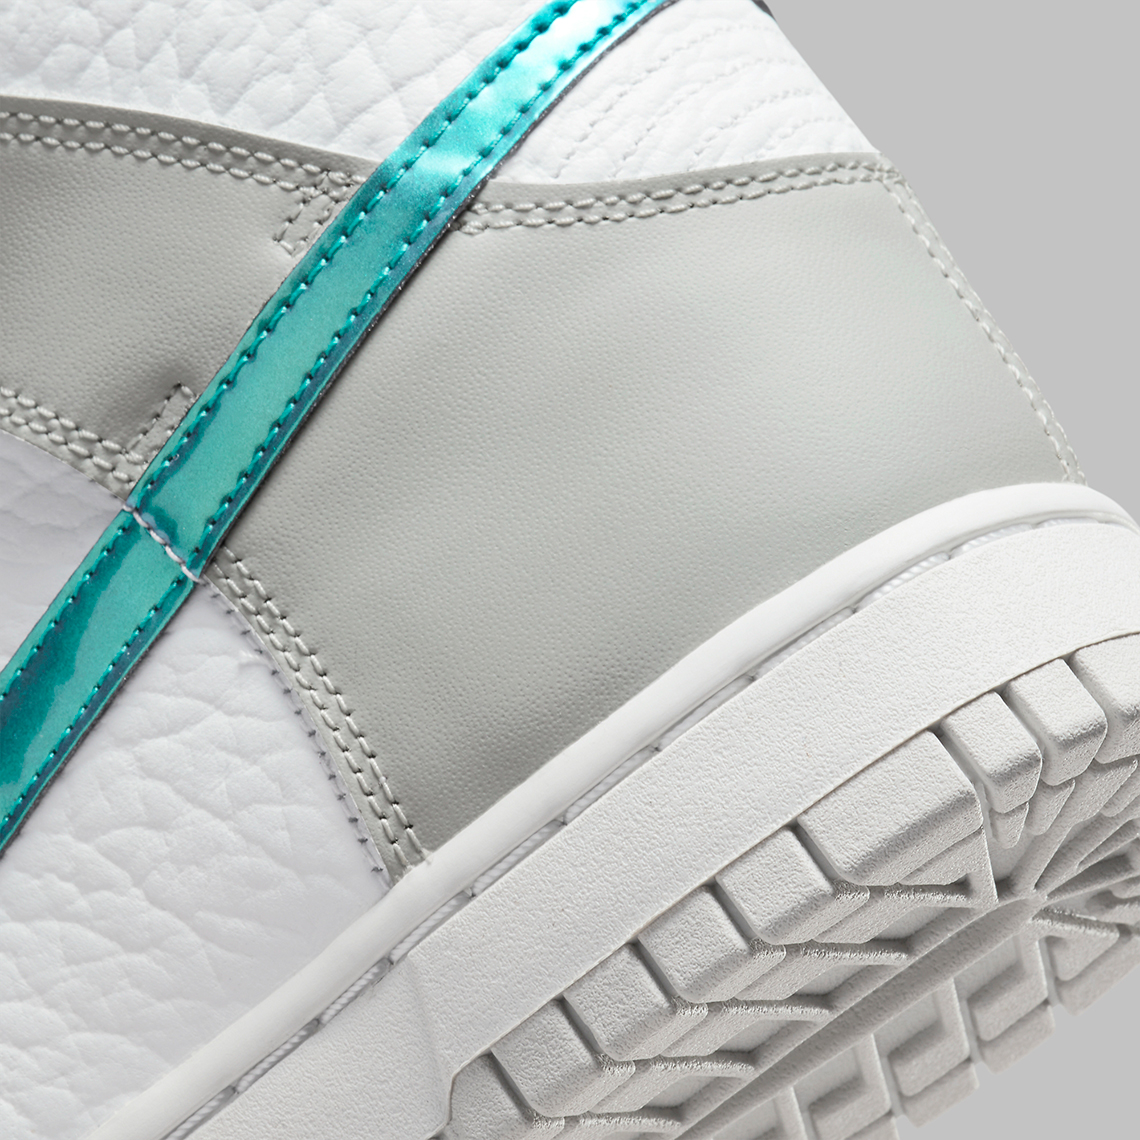 Nike Dunk High White Grey Turquoise Dr7855 100 4